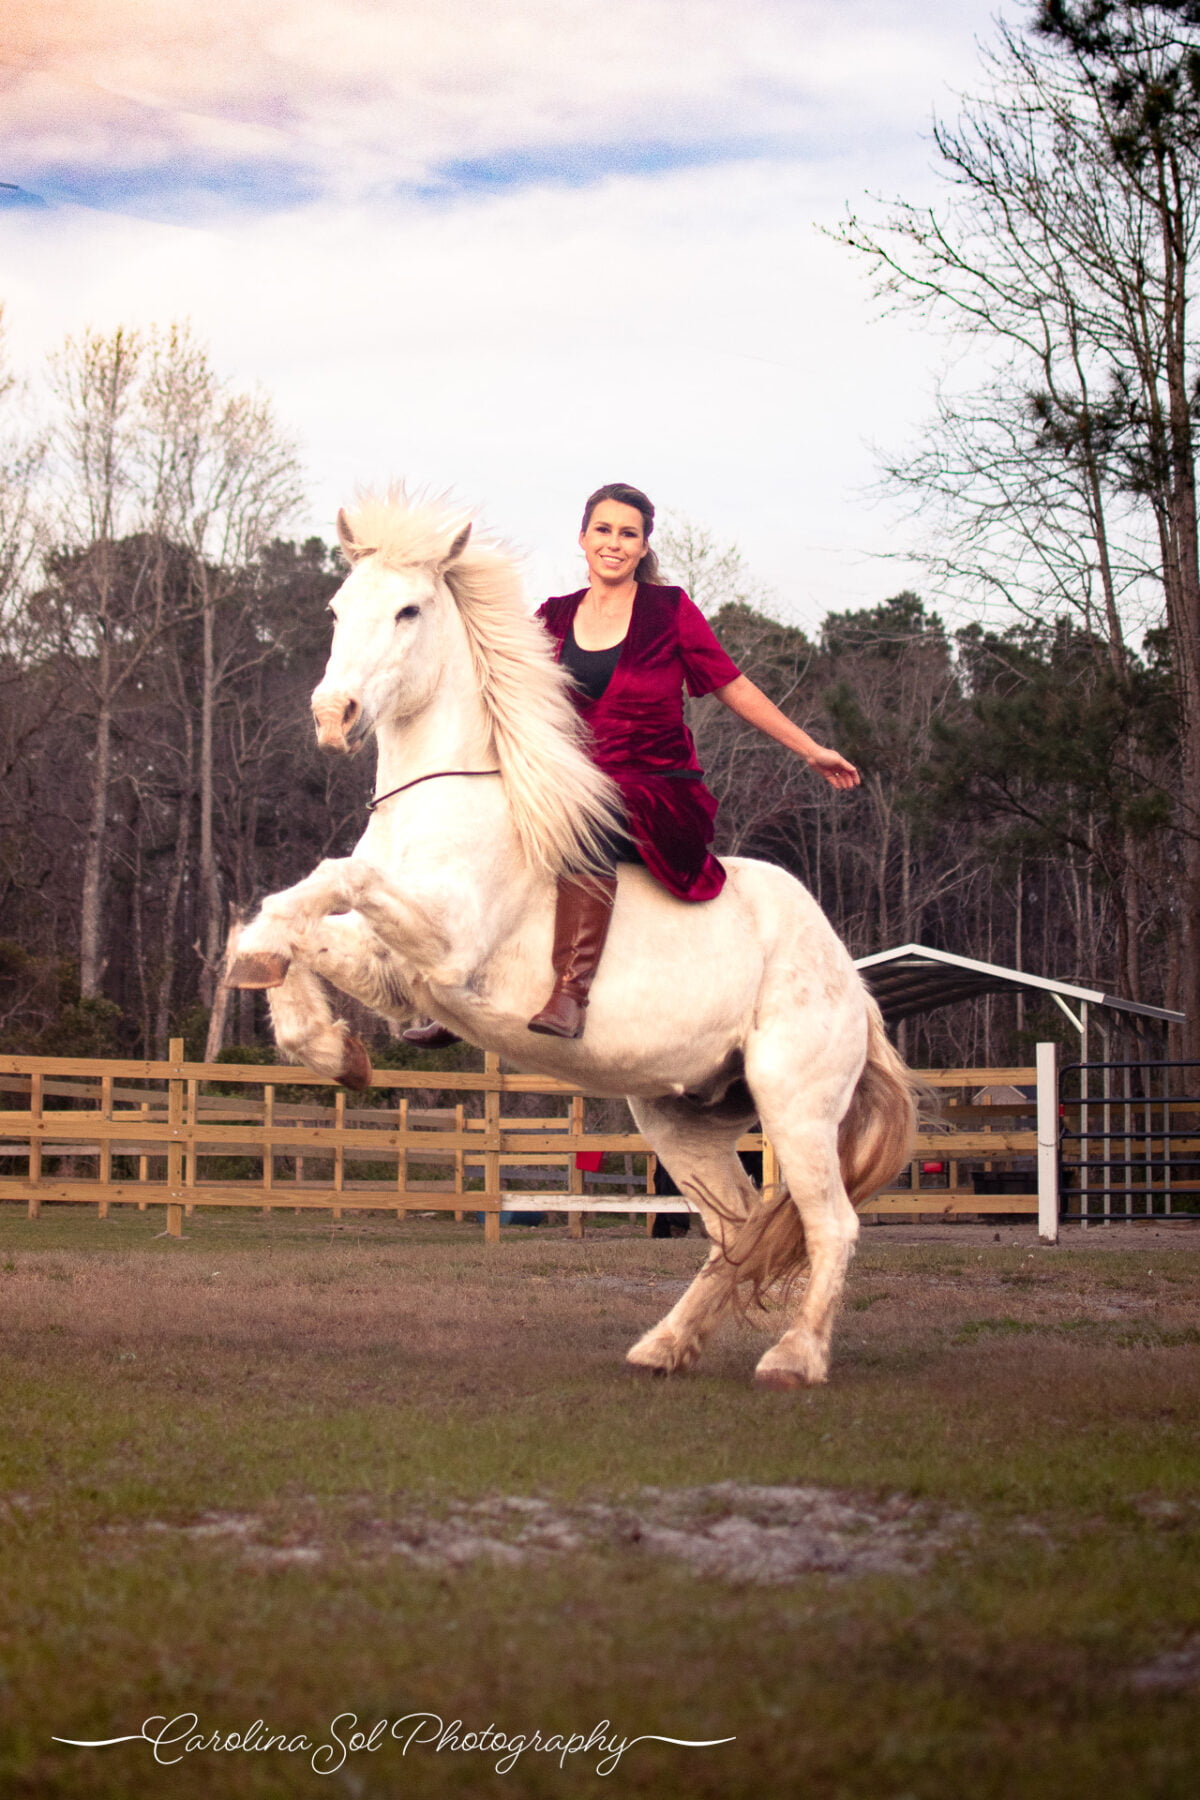 Trick horses preforming with trainer equine photography Shallotte, NC.